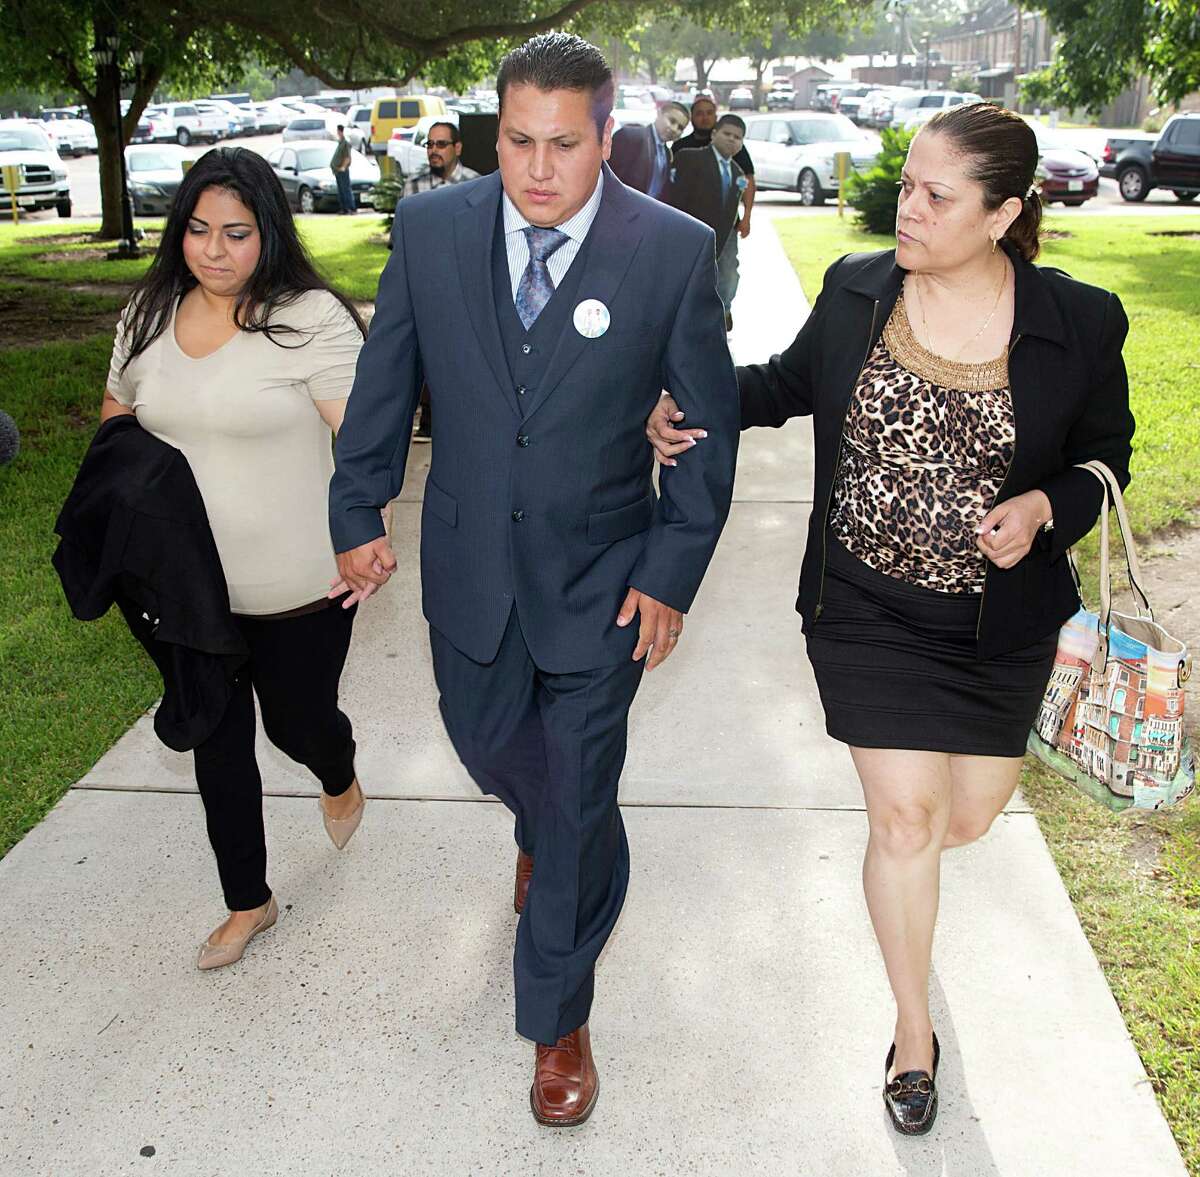 David Barajas, charged with murder, walks with wife, Cindy, left, and stepmother, Betty Hernandez, into court in Angleton. ﻿